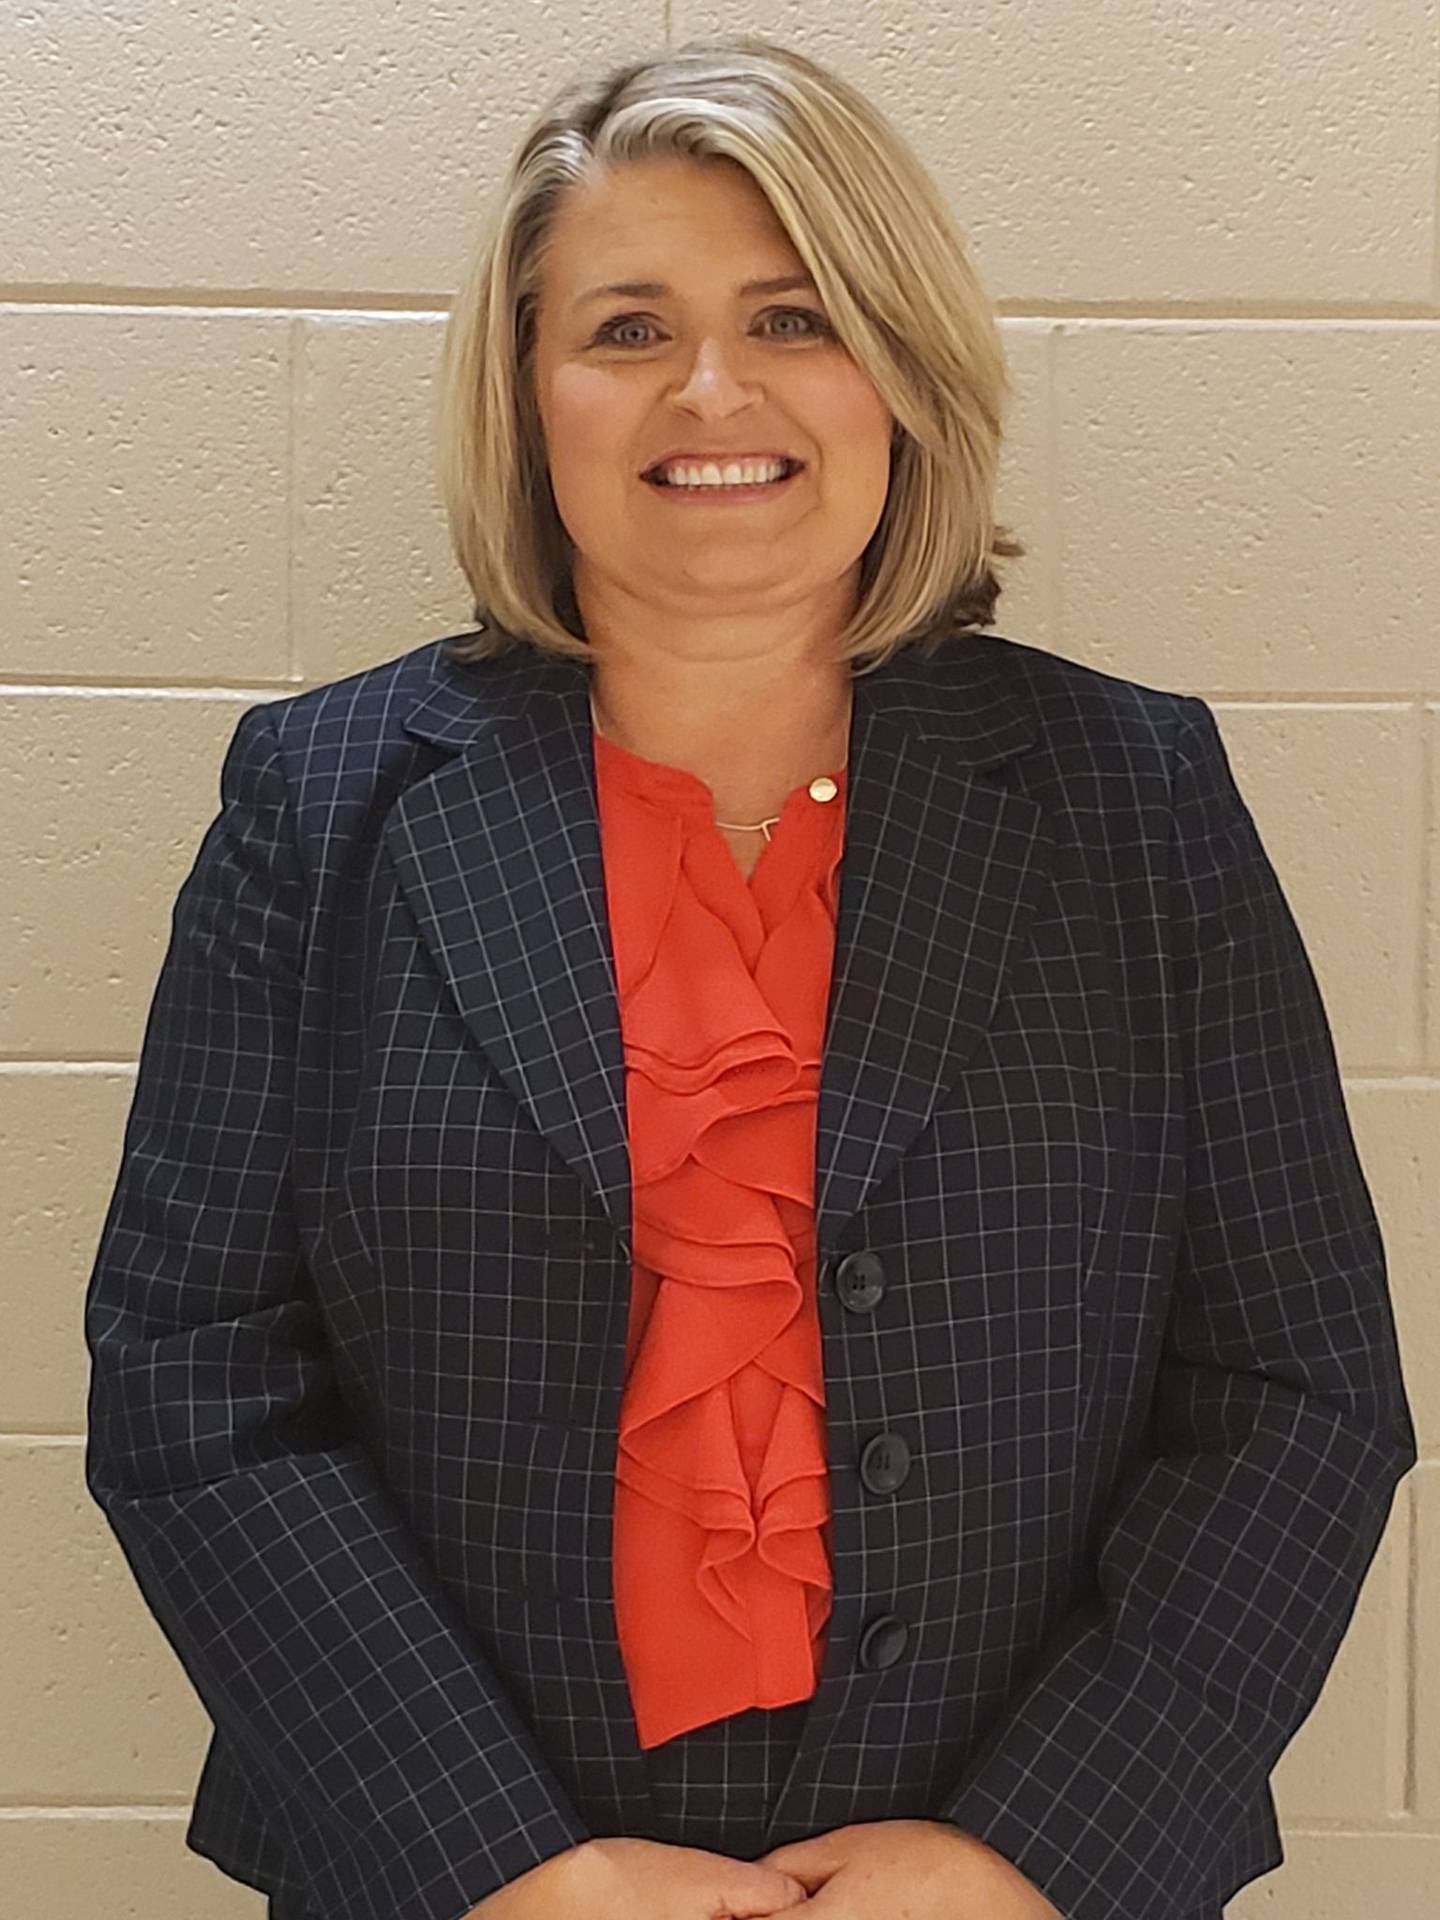 Paula Sereleas, director for middle school curriculum and instruction at District 202 in Plainfield, will serve as assistant superintendentfor curriculum and instruction.